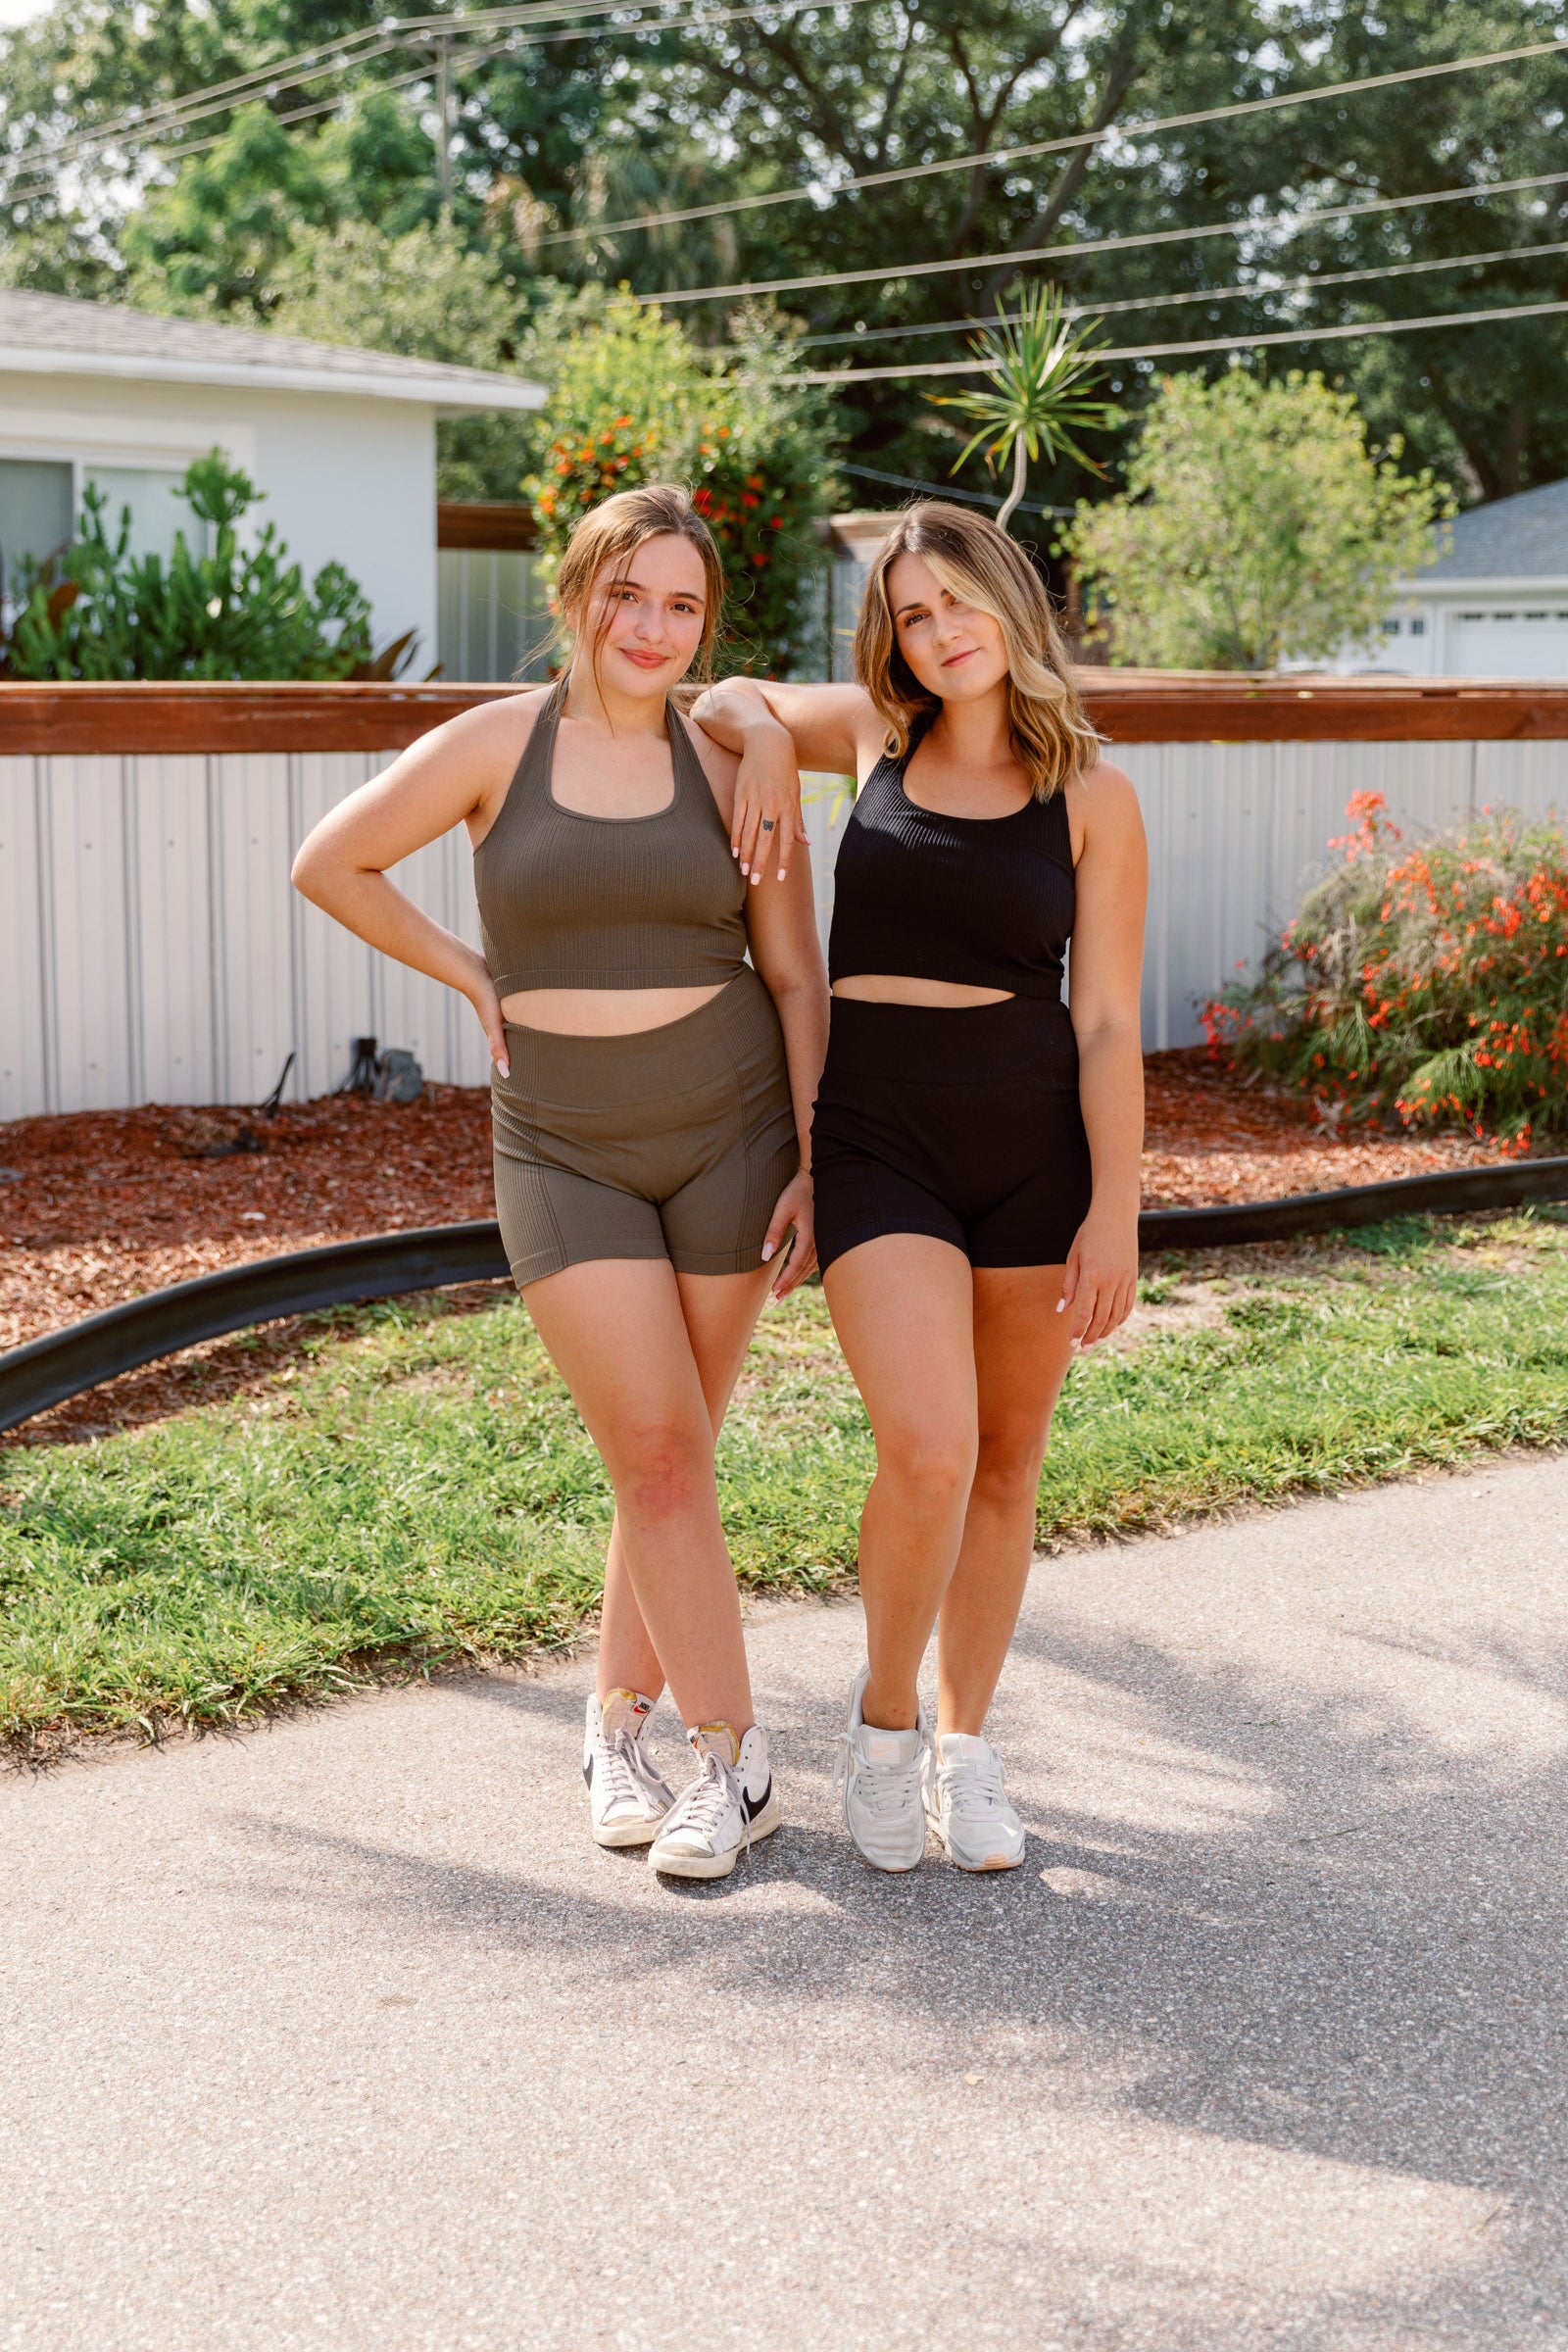 Description Coming Soon! Model Info Hailey is wearing a size LHeight: 5’4”Waist: 35”Hips: 41.5”Bust: 39”Saige is wearing a size MHeight: 5’4”Waist: 28.5”Hips: 38.5”Bust: 34”